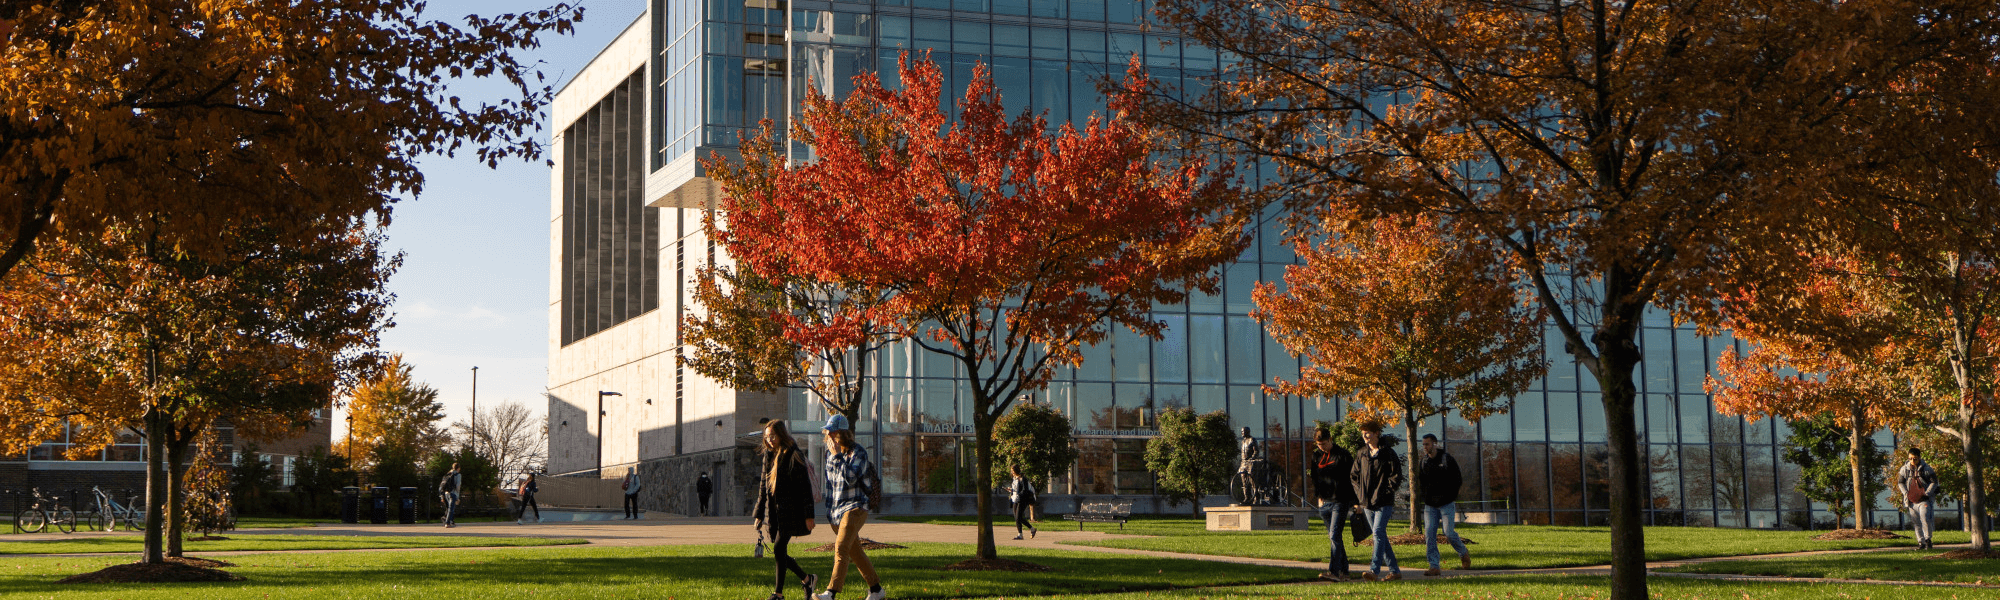 Image of Grand Valley State University's 艾伦代尔 campus.